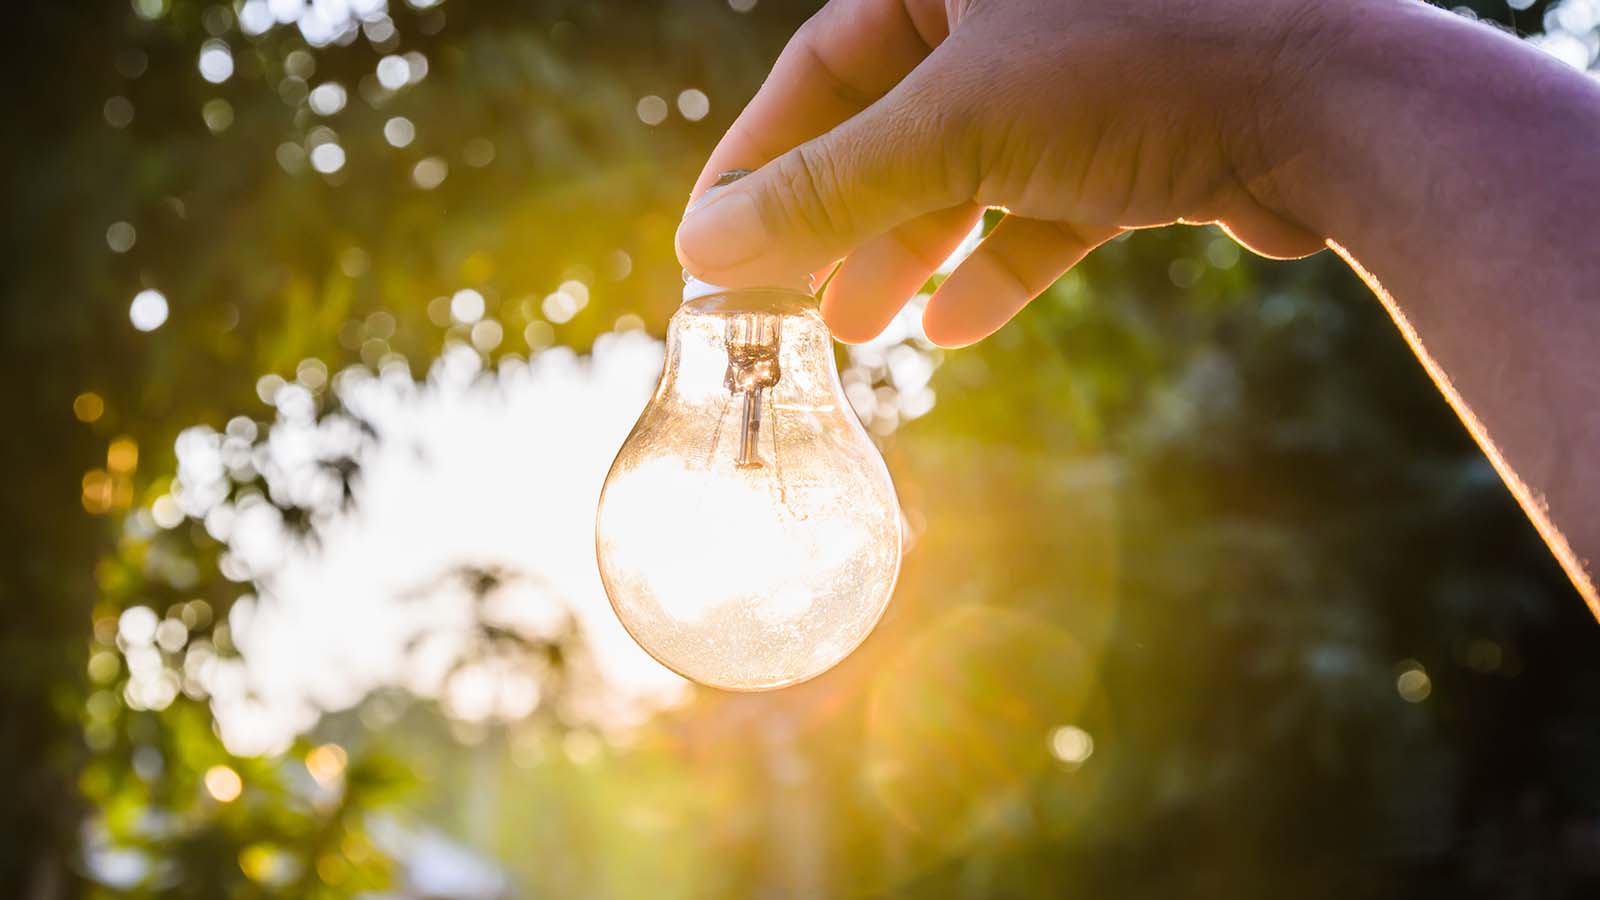 image of a hand holding a bright light bulb outdoors with trees in the background